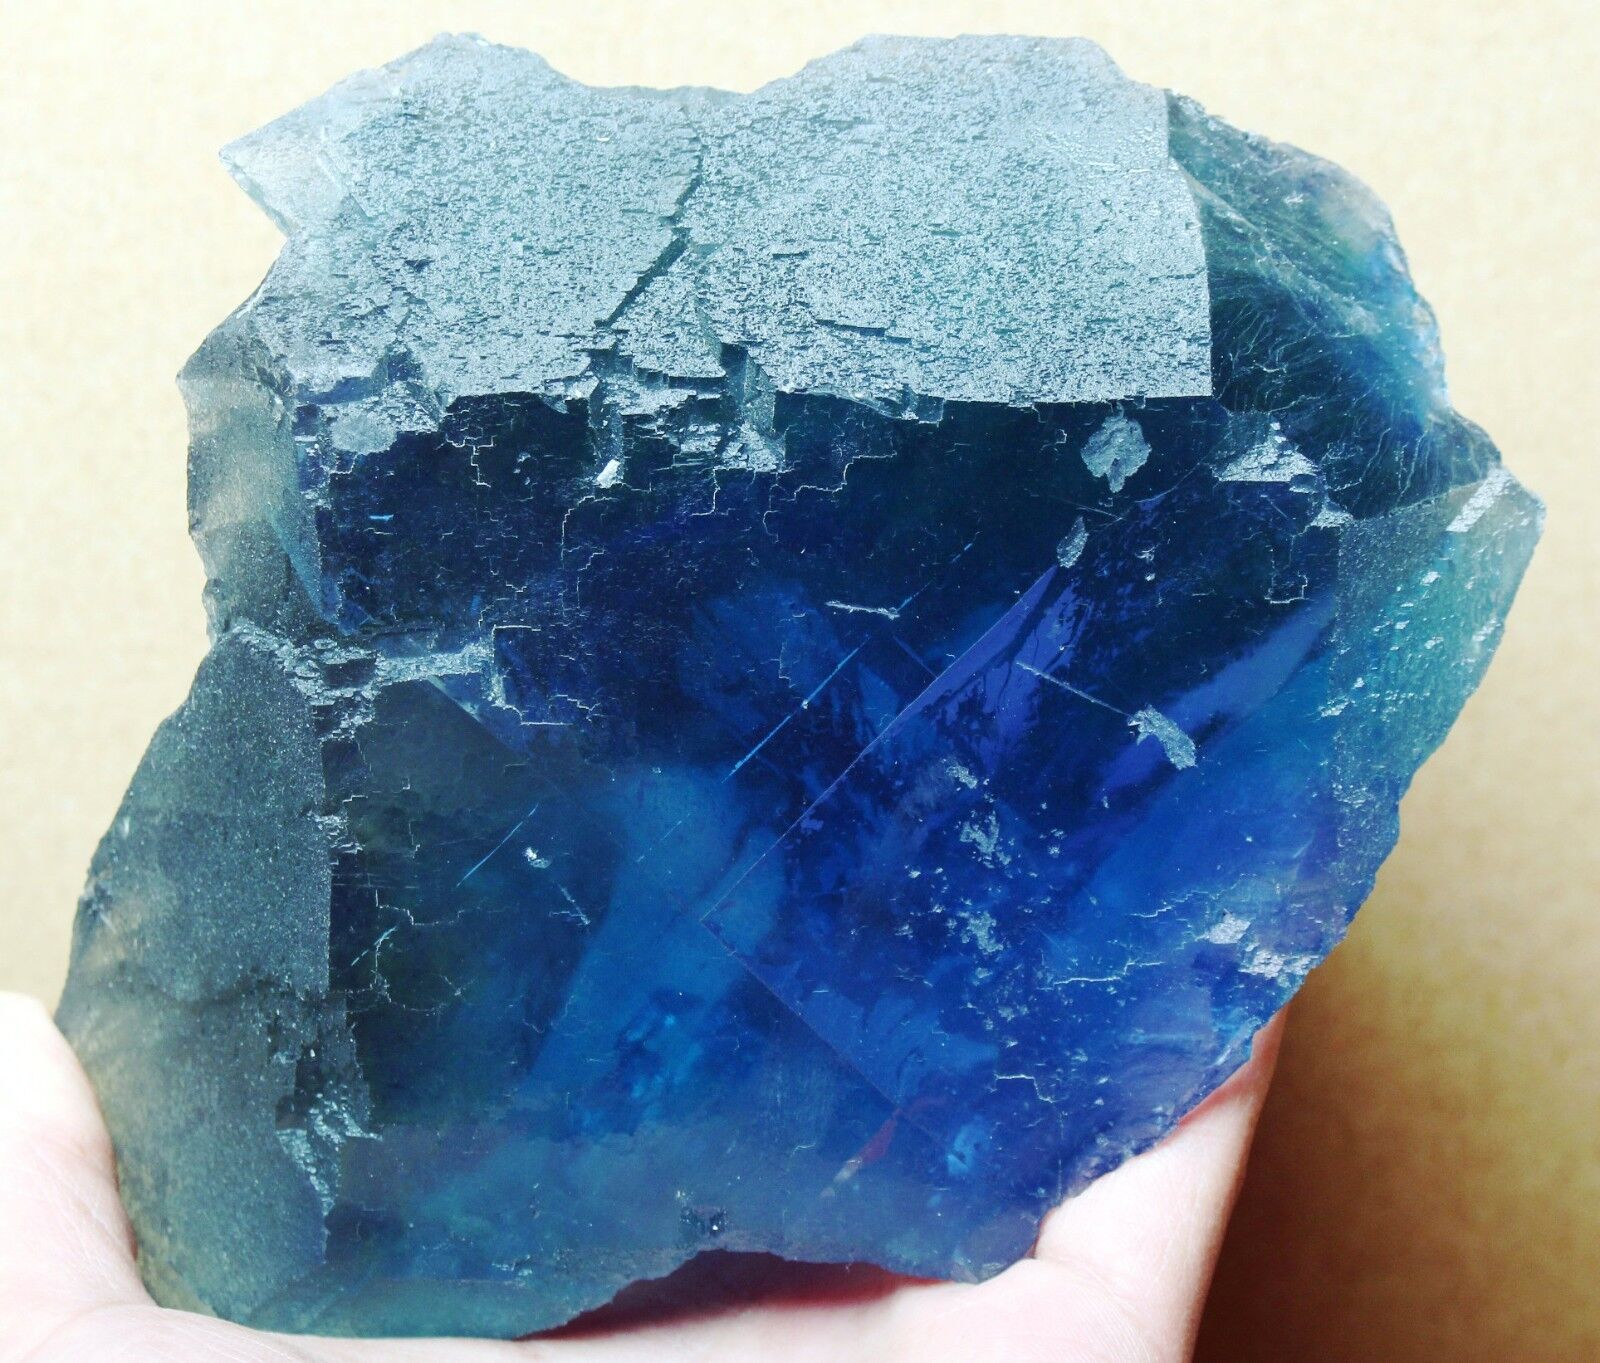 Rare Larger Particles Blue/Green Cube Fluorite Crystal Mineral Specimen